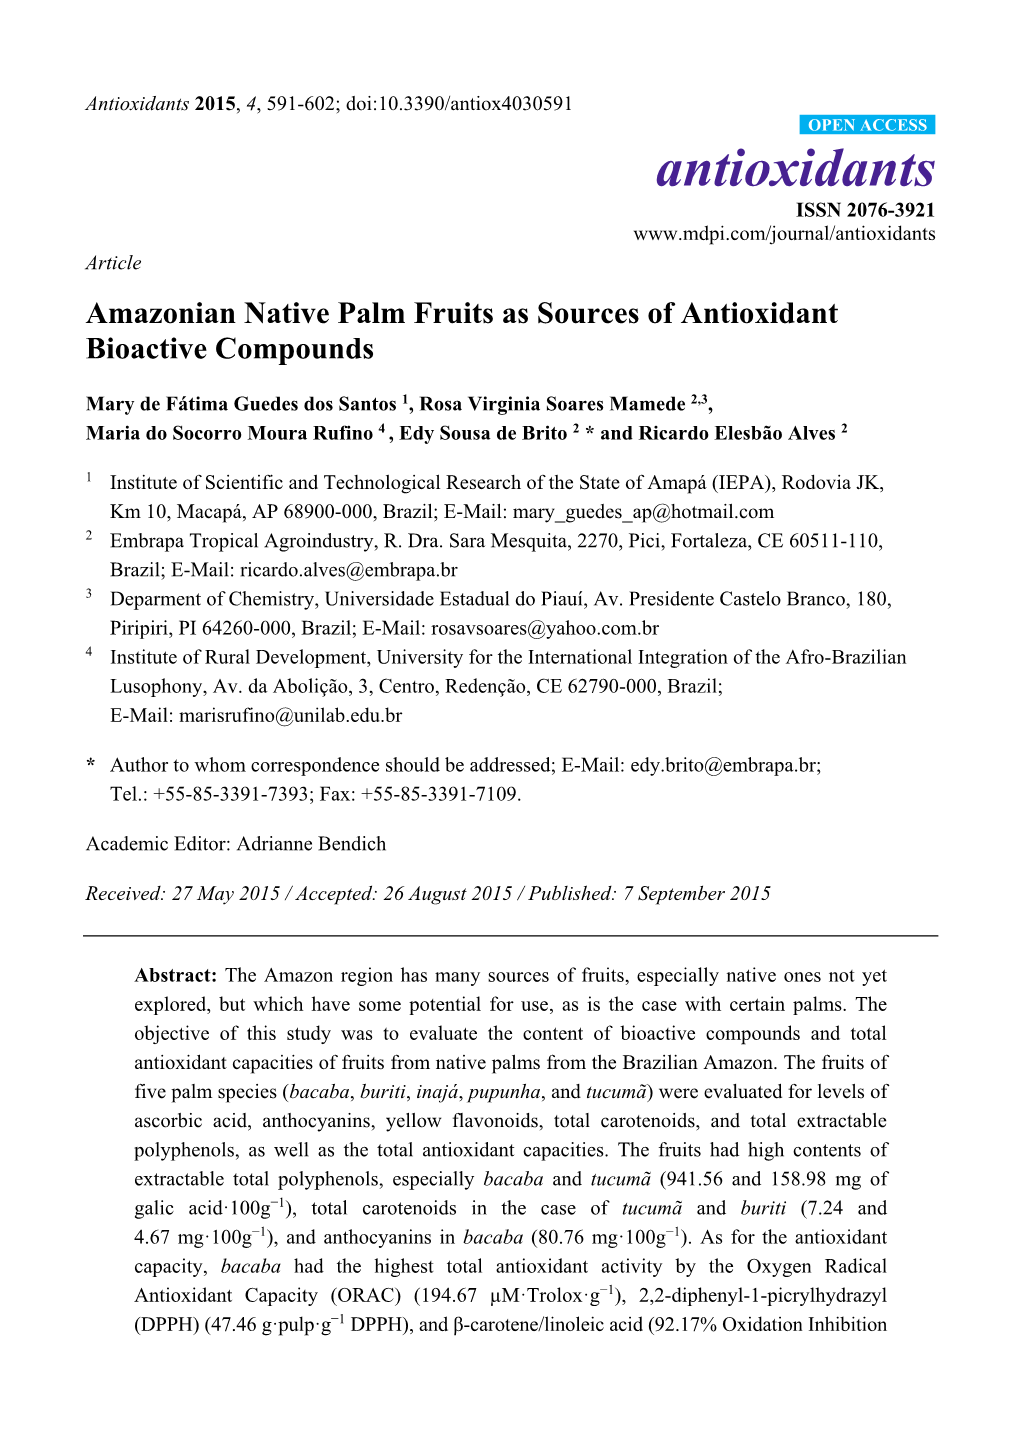 Amazonian Native Palm Fruits As Sources of Antioxidant Bioactive Compounds